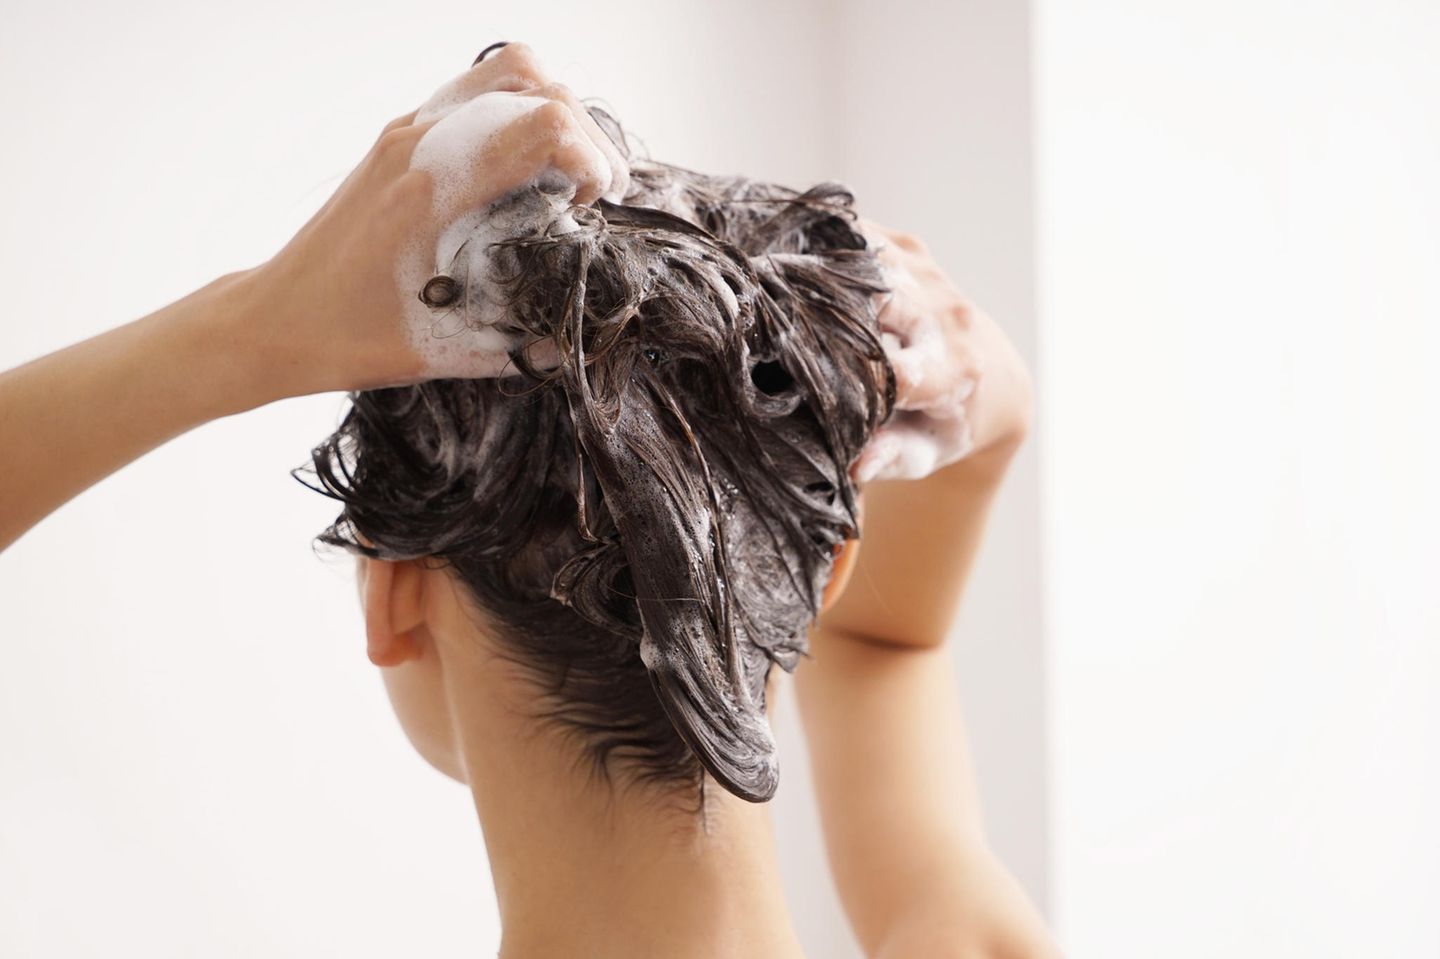 brunette-woman-washes-hair-with-shampoo-against-greasy-hair